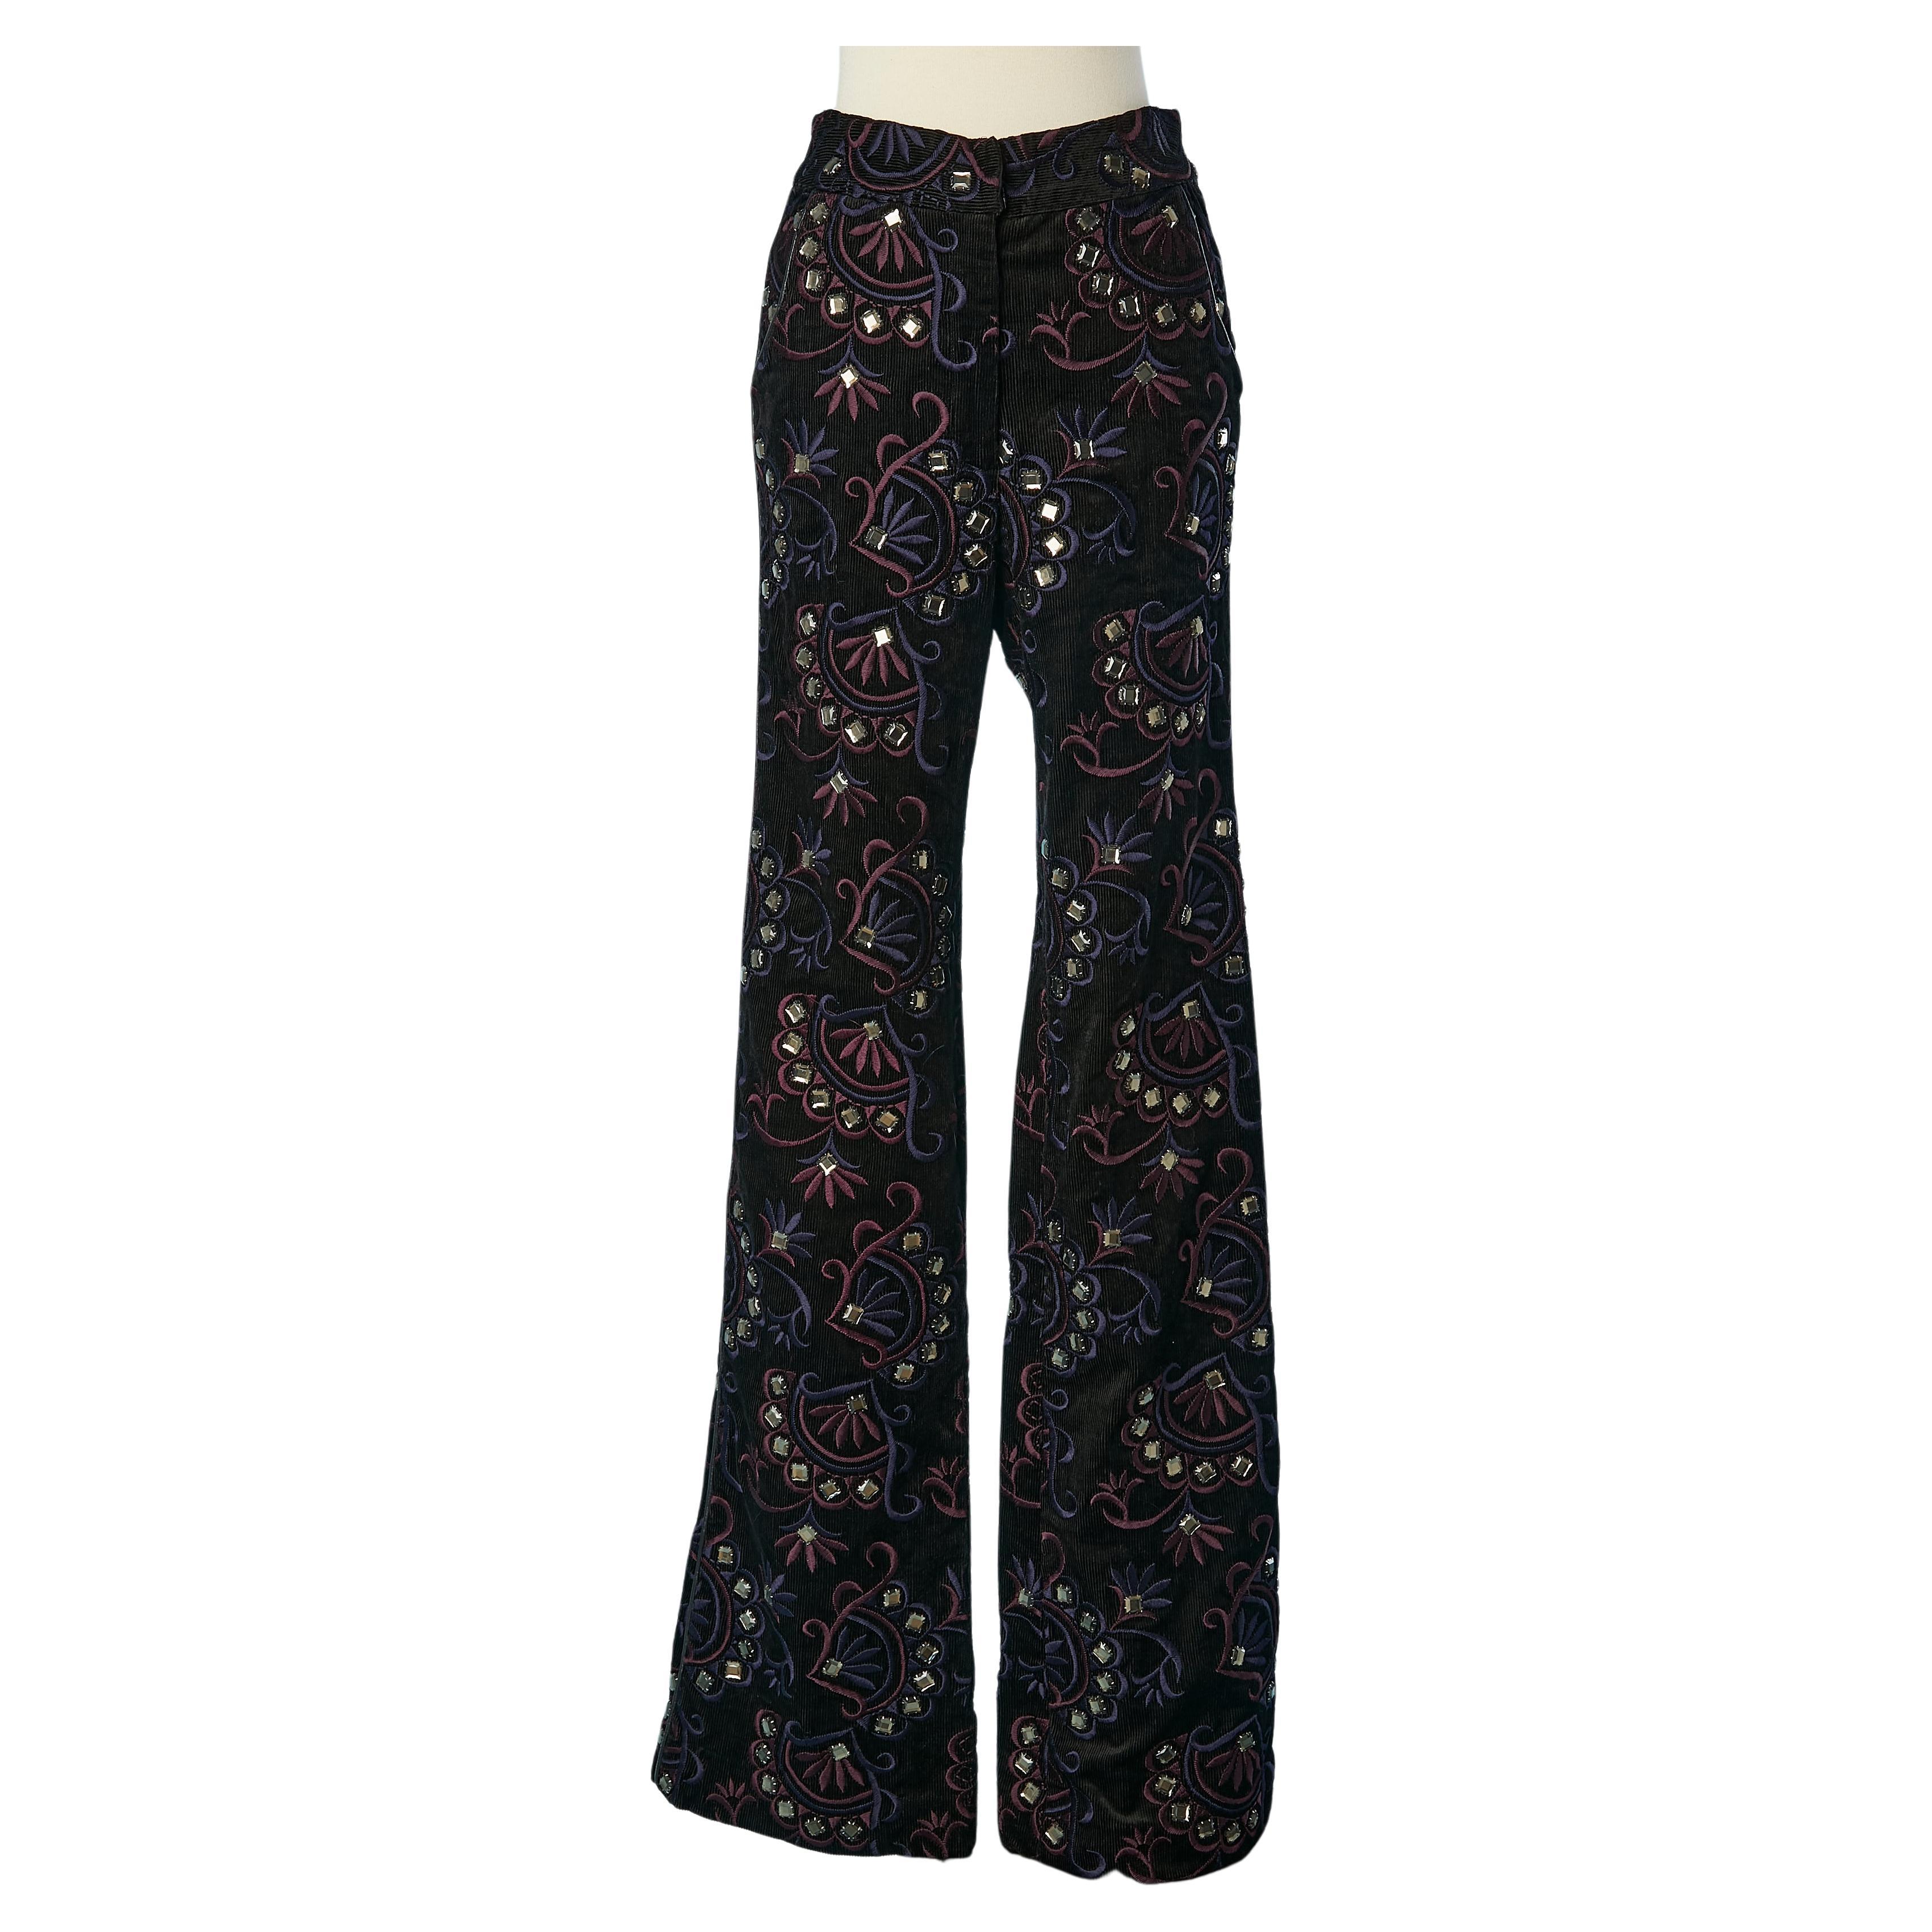 Navy corduroy trouser with rhinestone and threads embroideries Elise Overland  For Sale